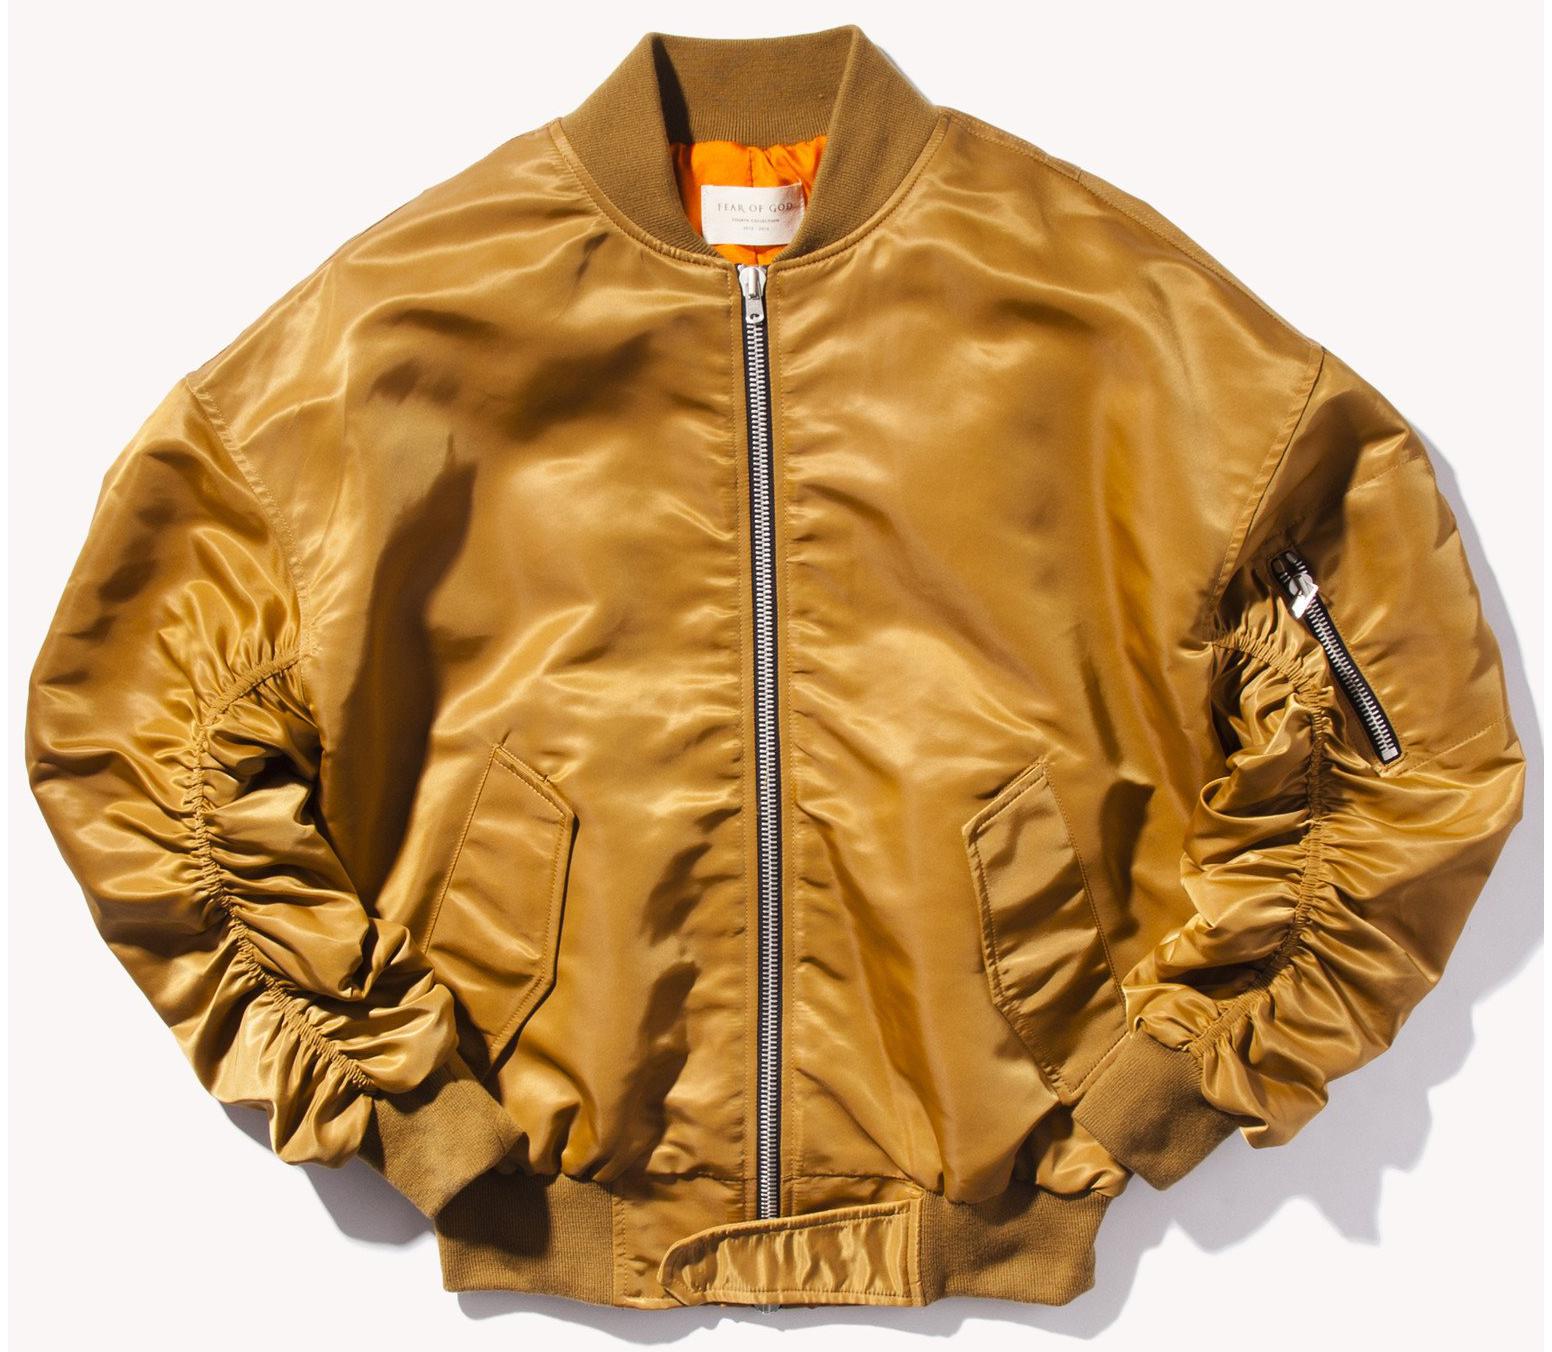 FEAR OF GOD Bomber Jacket Gold - Fourth Collection - US